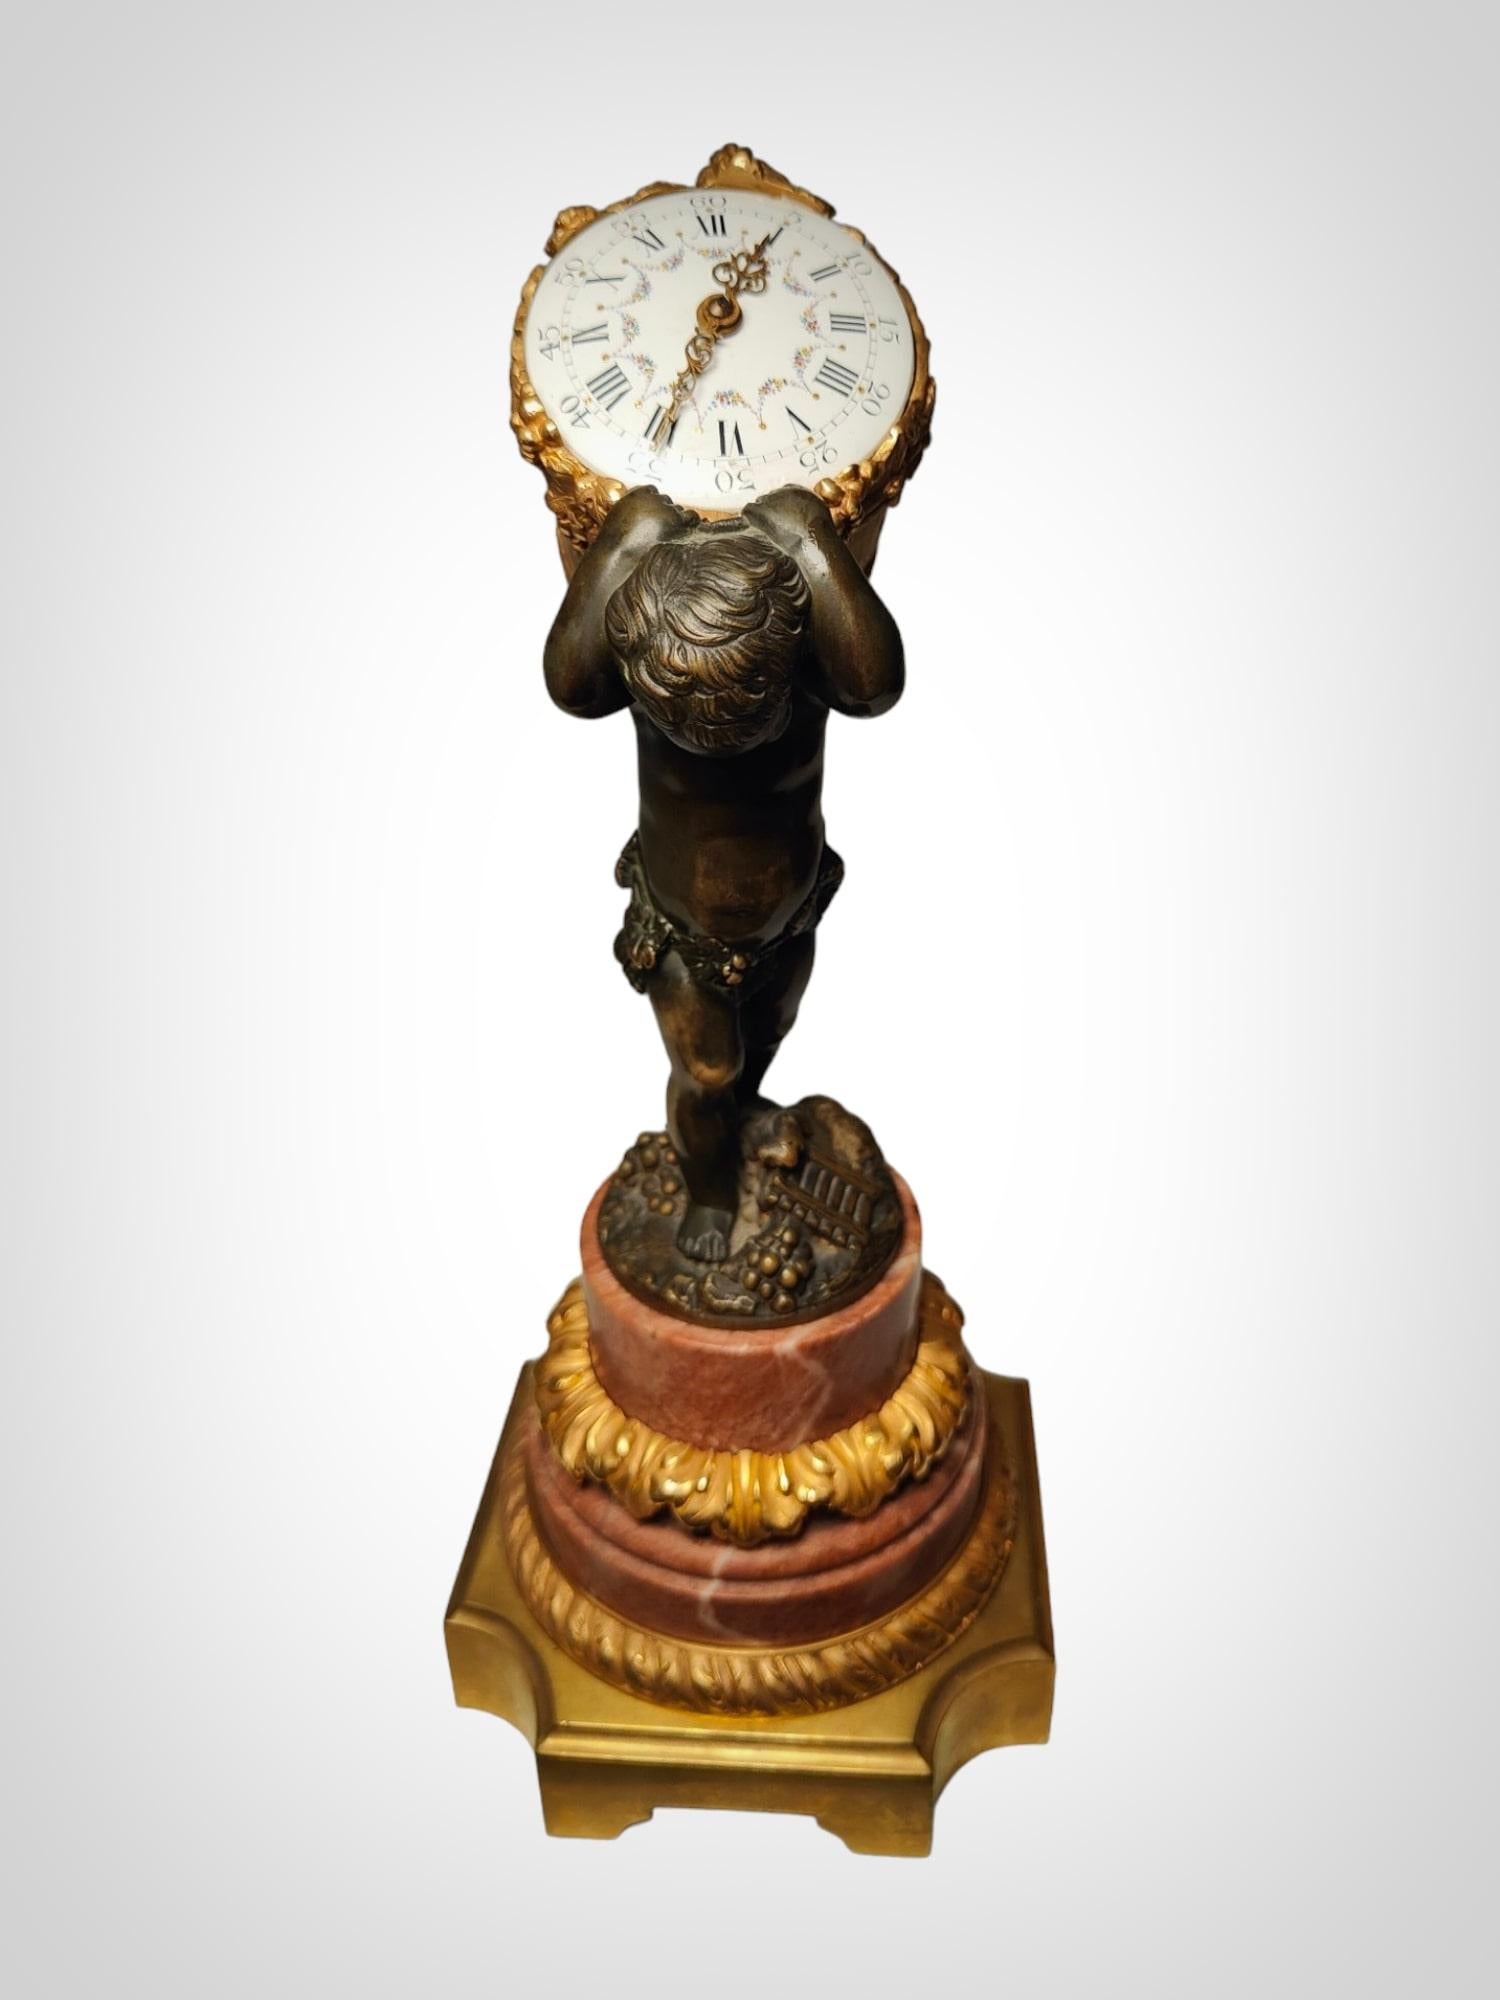 Transport your space to the 19th century with this elegant French bronze clock, adorned with gilding and patina, depicting a cherub, an allegory of the harvest. This clock is a masterpiece both in design and functionality. Resting on a beautiful red